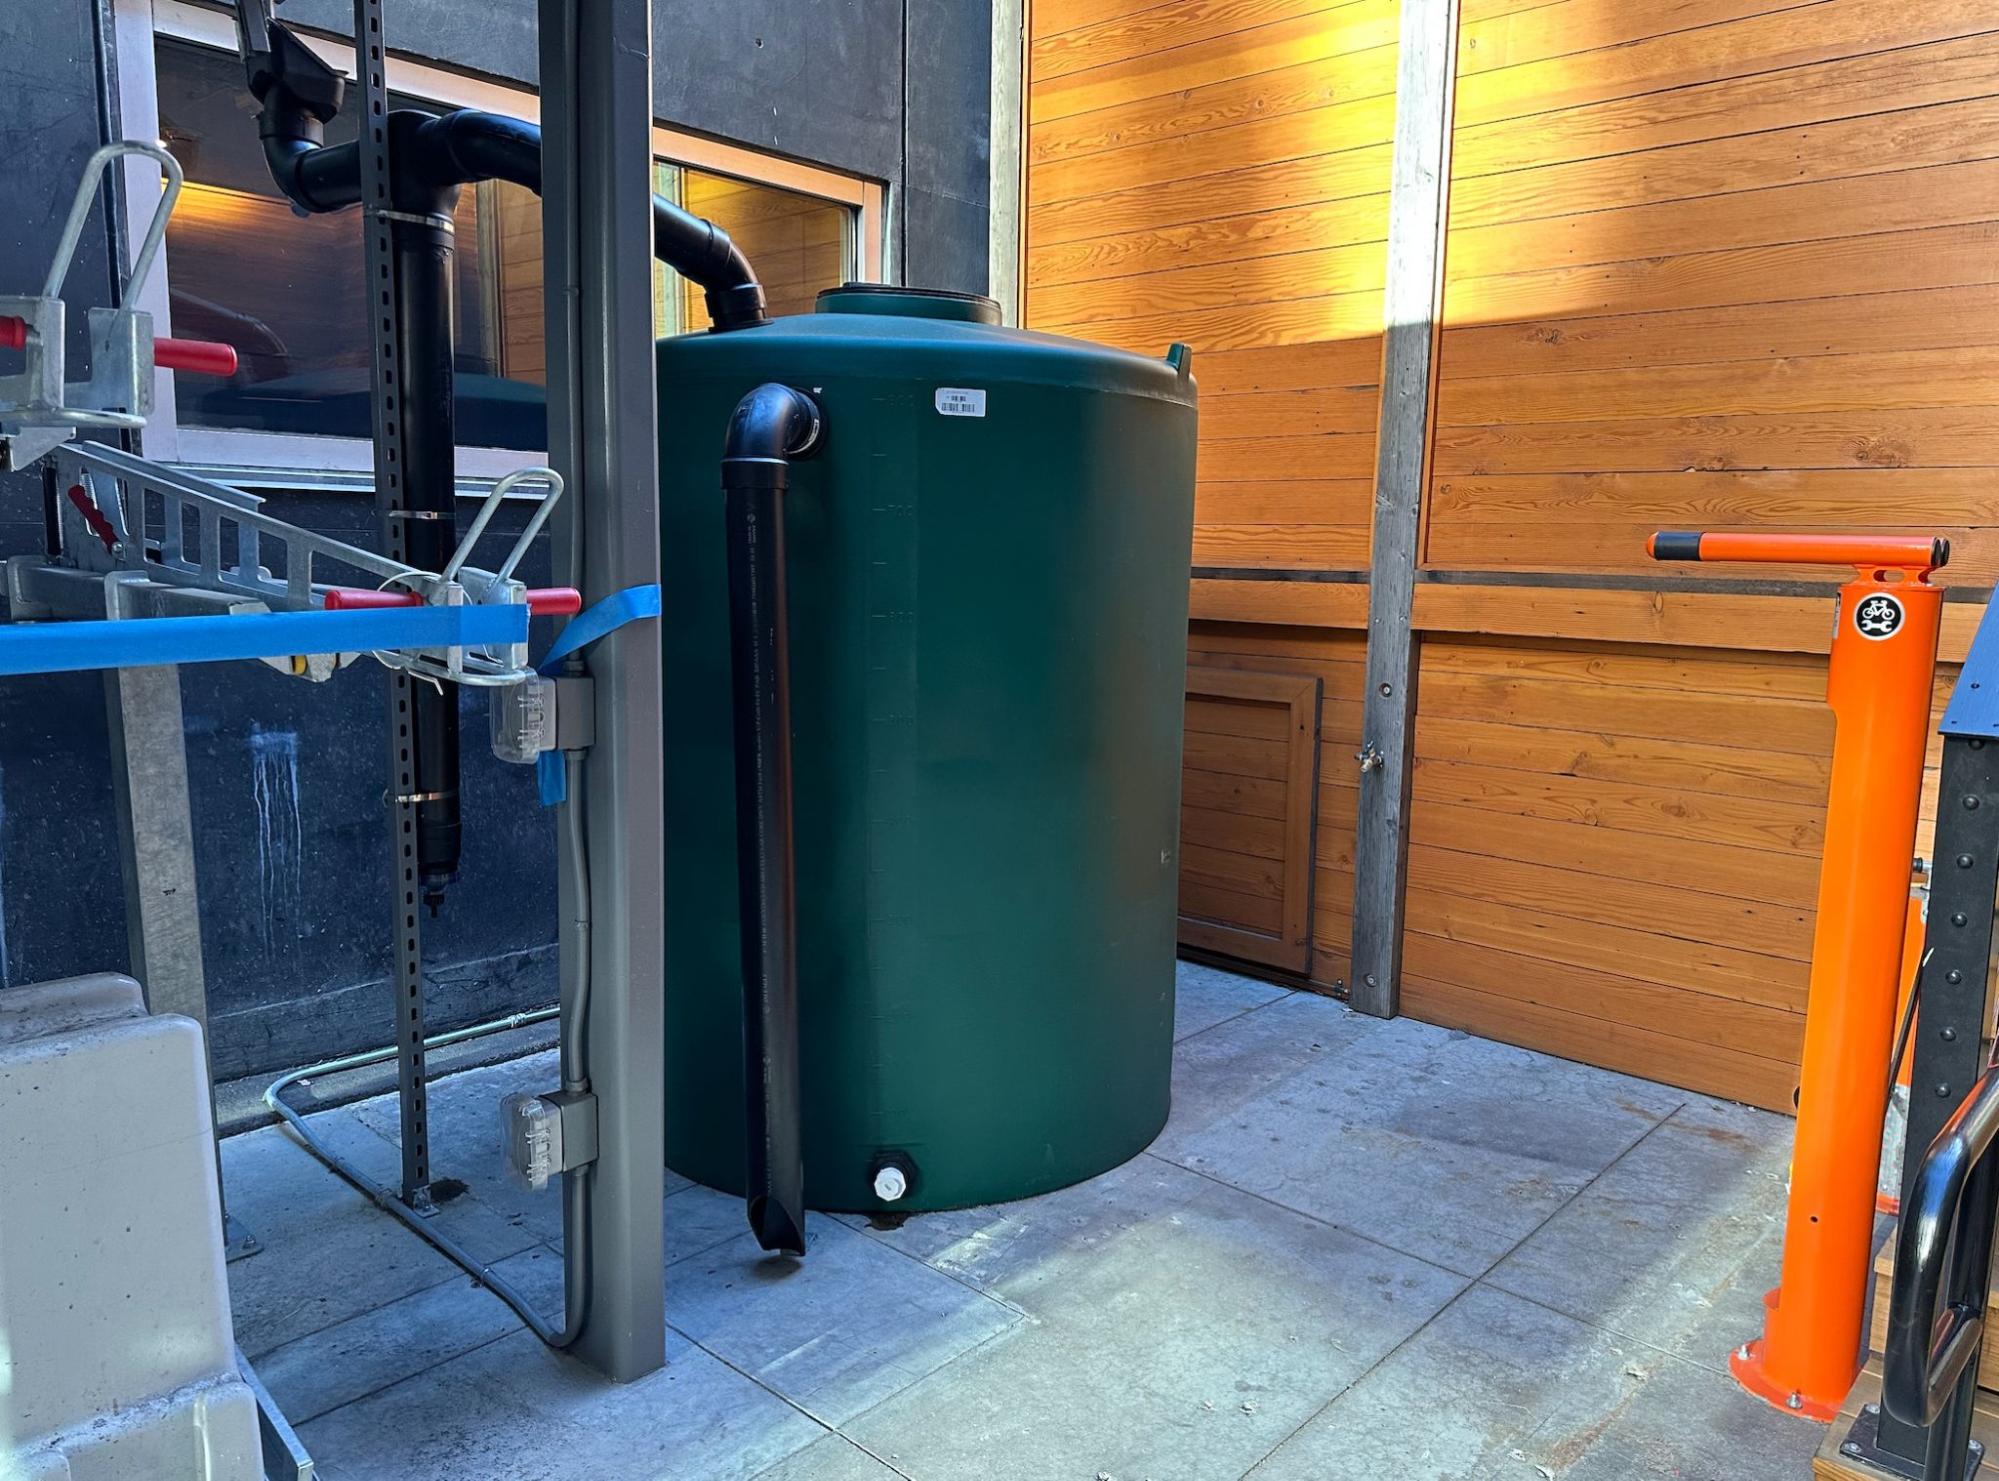 Rainwater harvesting system at our San Francisco office